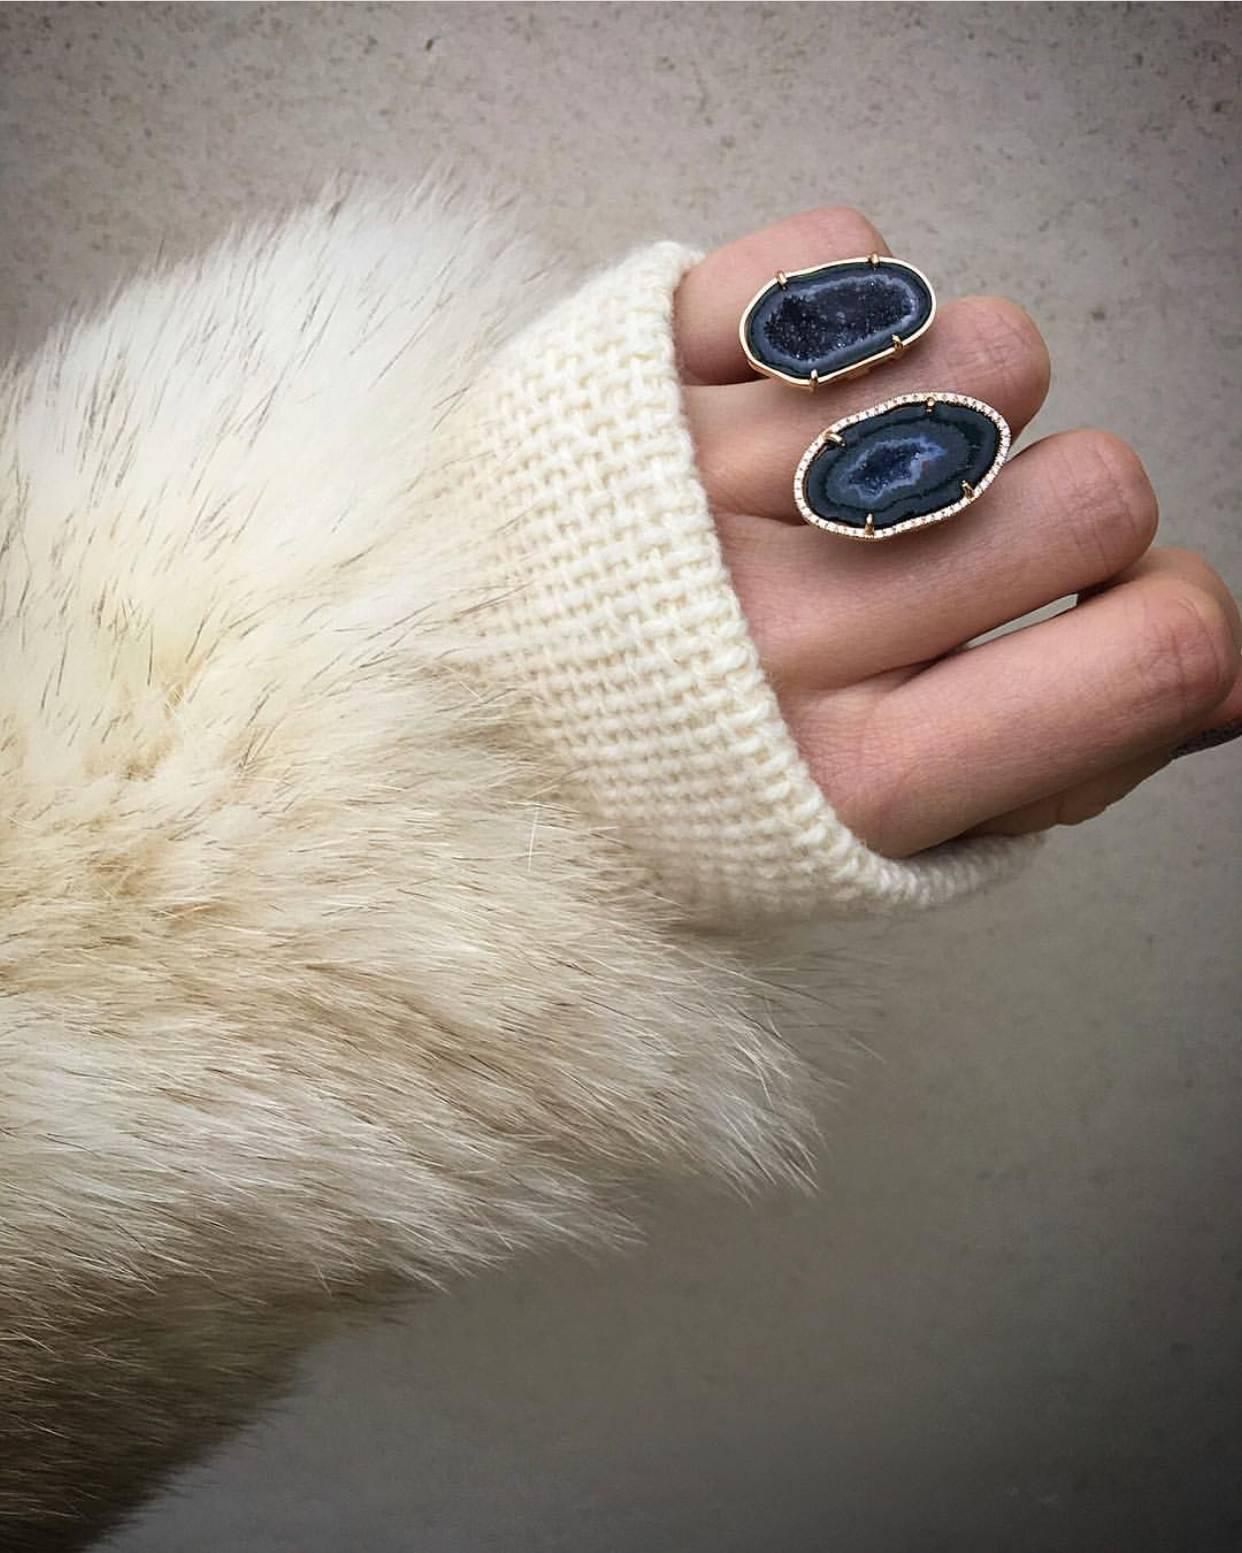 This striking Noa Ring is crafted with flawless attention to detail so it looks like a piece of art. Set in 18 k rose gold with 0,31 ct of shimmering diamonds it looks like you're wearing two agate geodes next to each other. Wear it as a statement